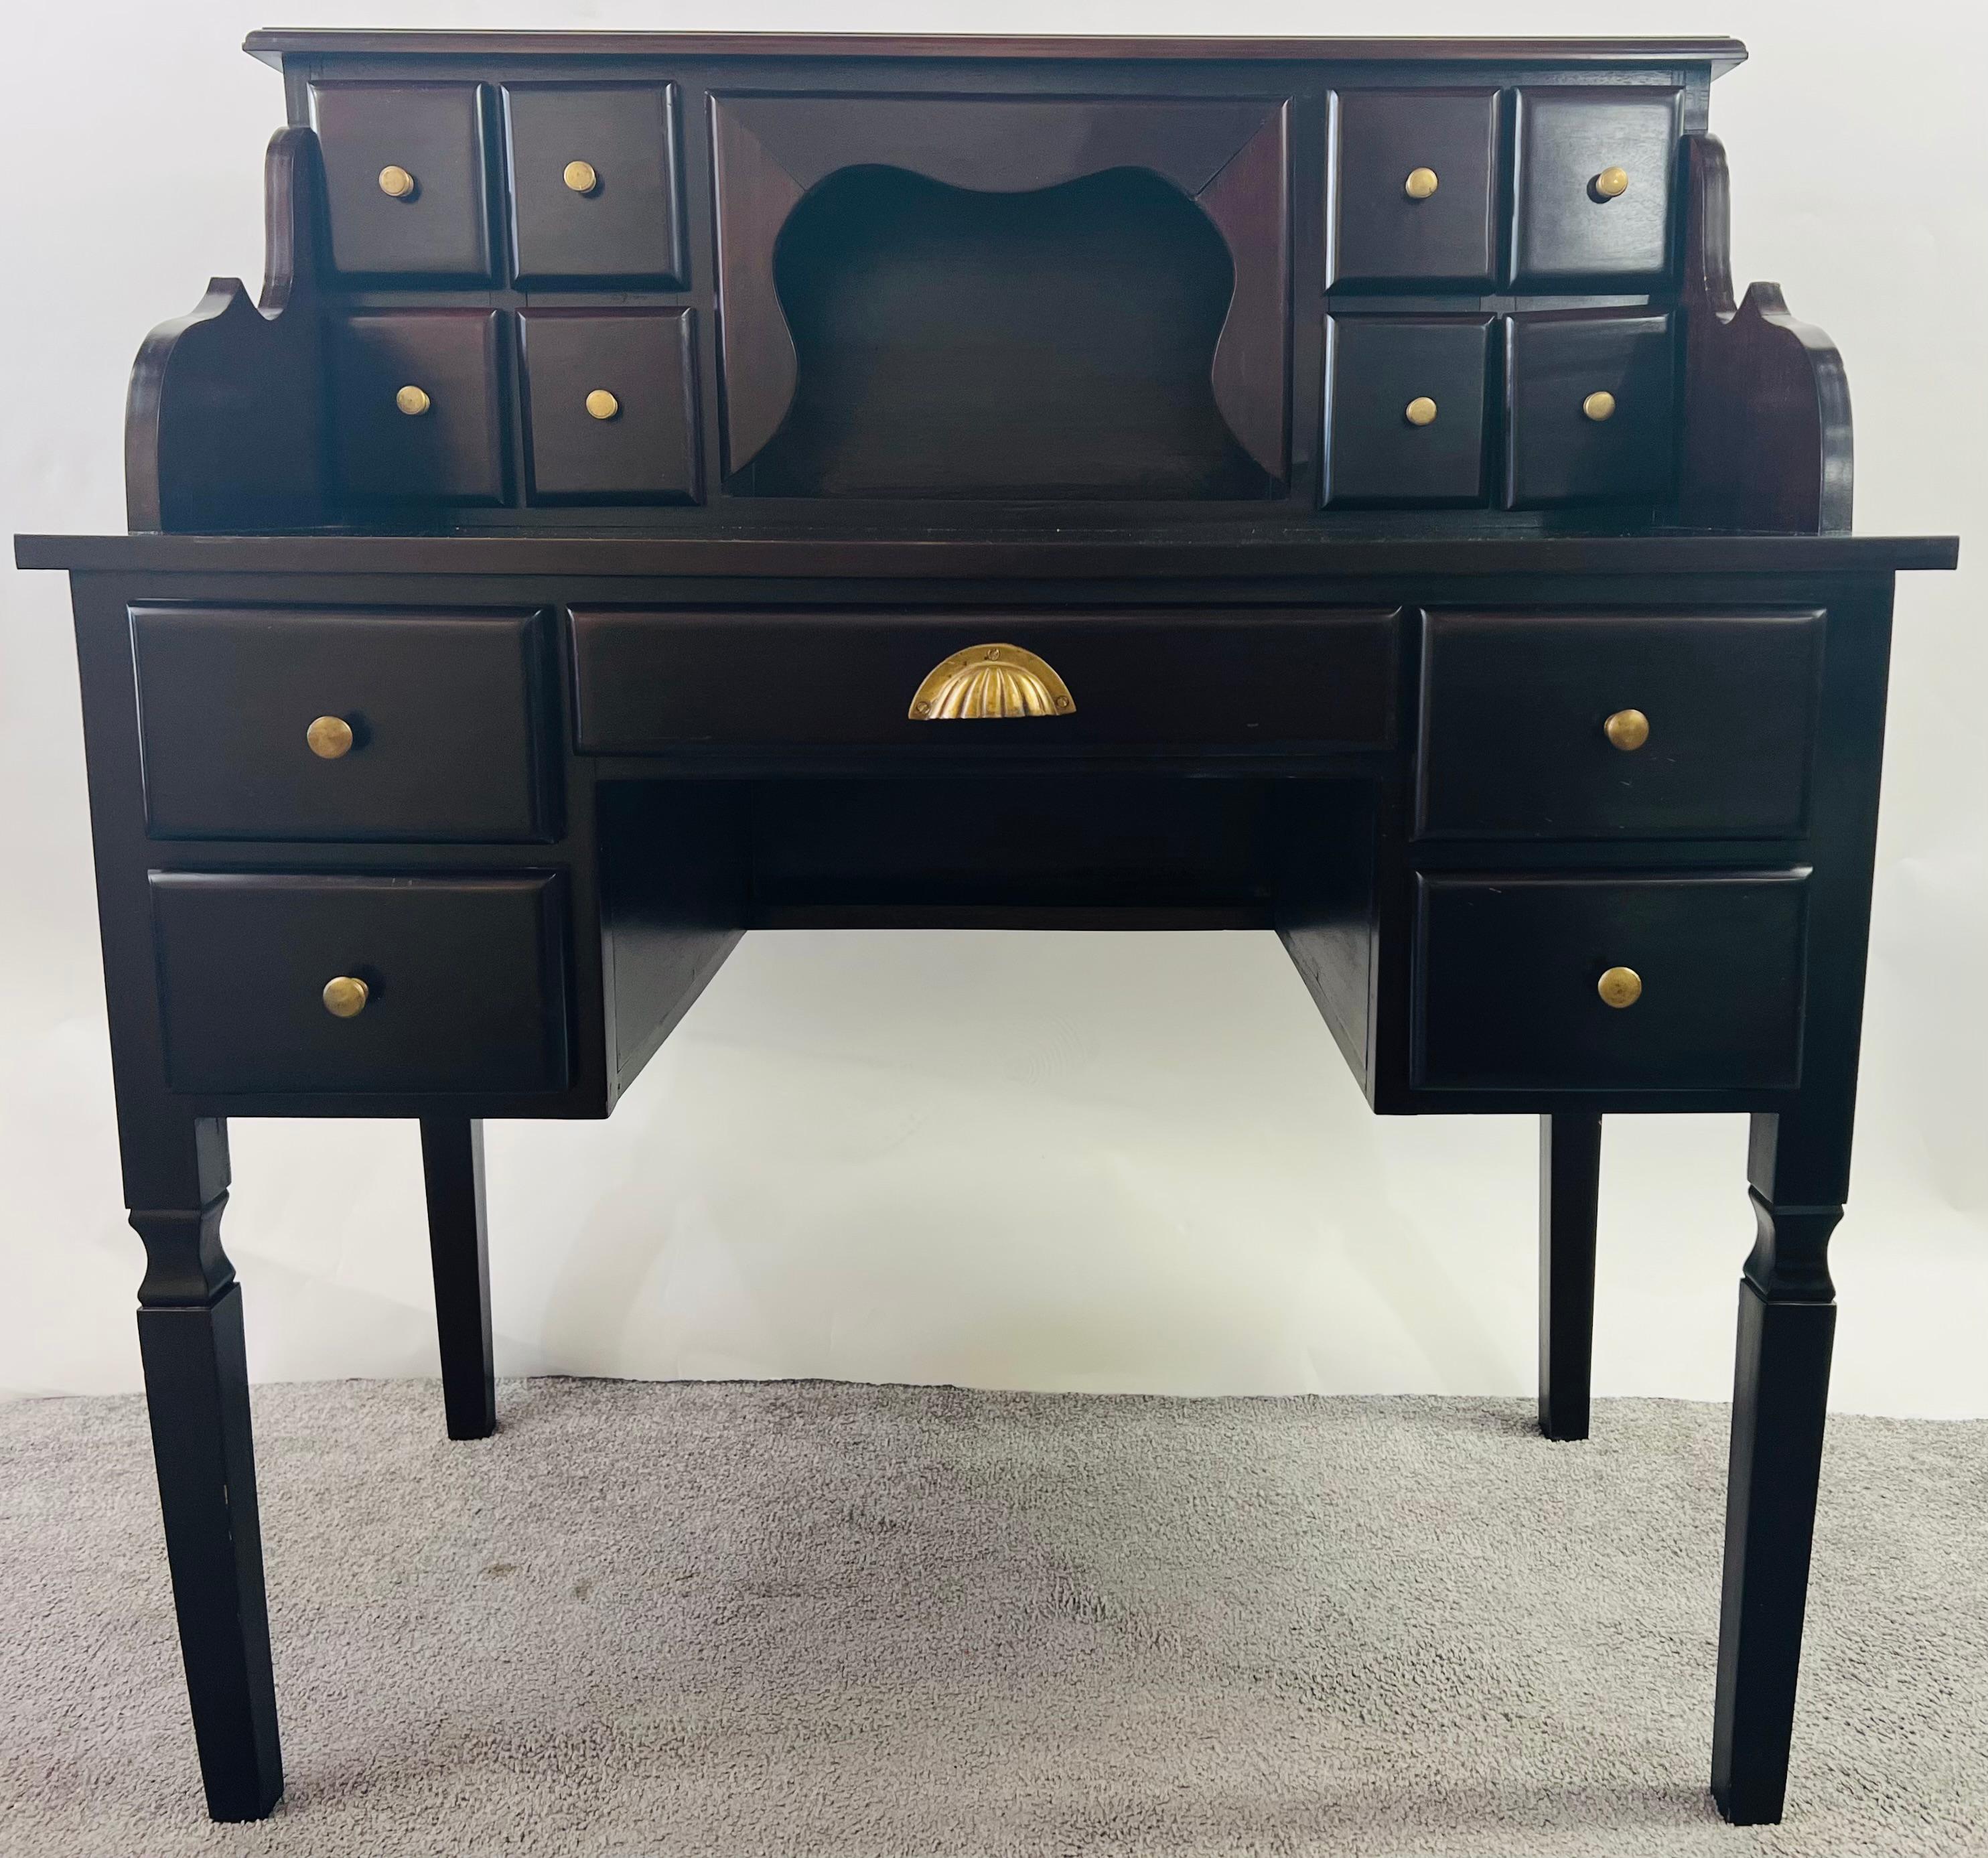 A beautiful and timeless 1970's American escritoire desk. The writing desk is made of solid mahogany and is sturdy. The desk shows fine carving details and offers 5 regular drawers and 8 small drawers on the top part with an additional large